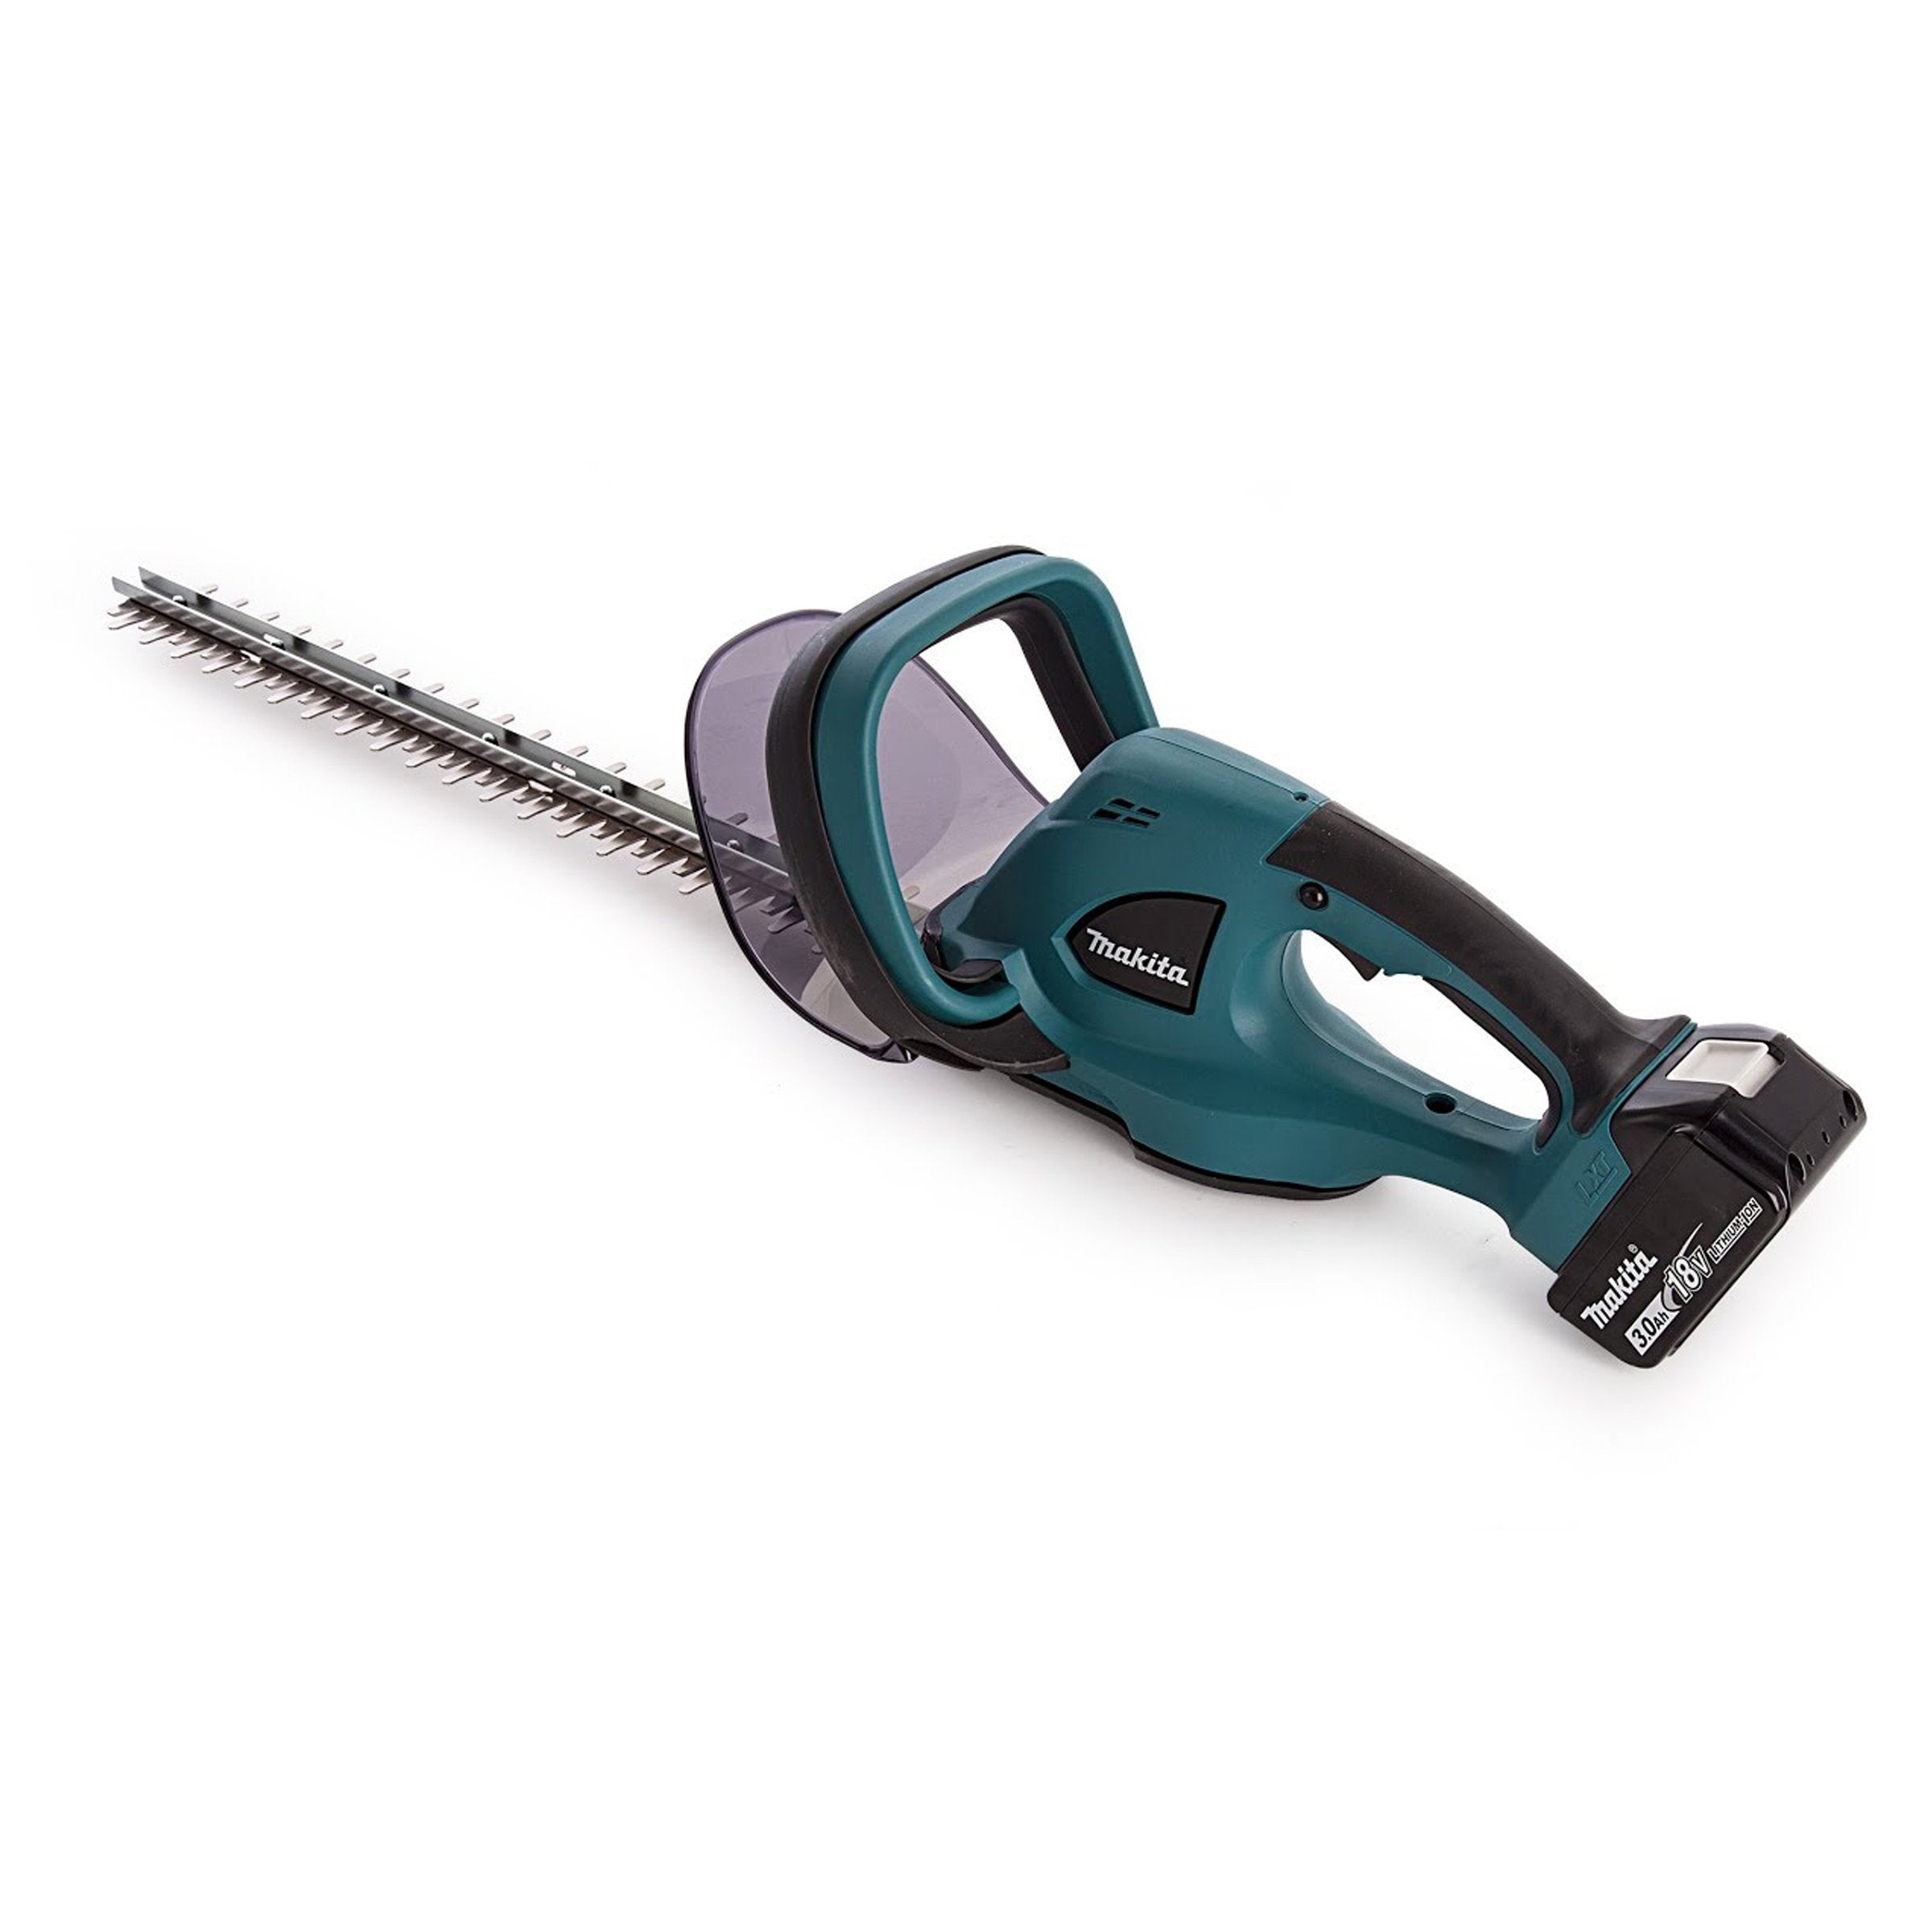 Makita 18V Cordless Hedge Trimmer DUH523Z 520Mm - Solo Power Tool Services